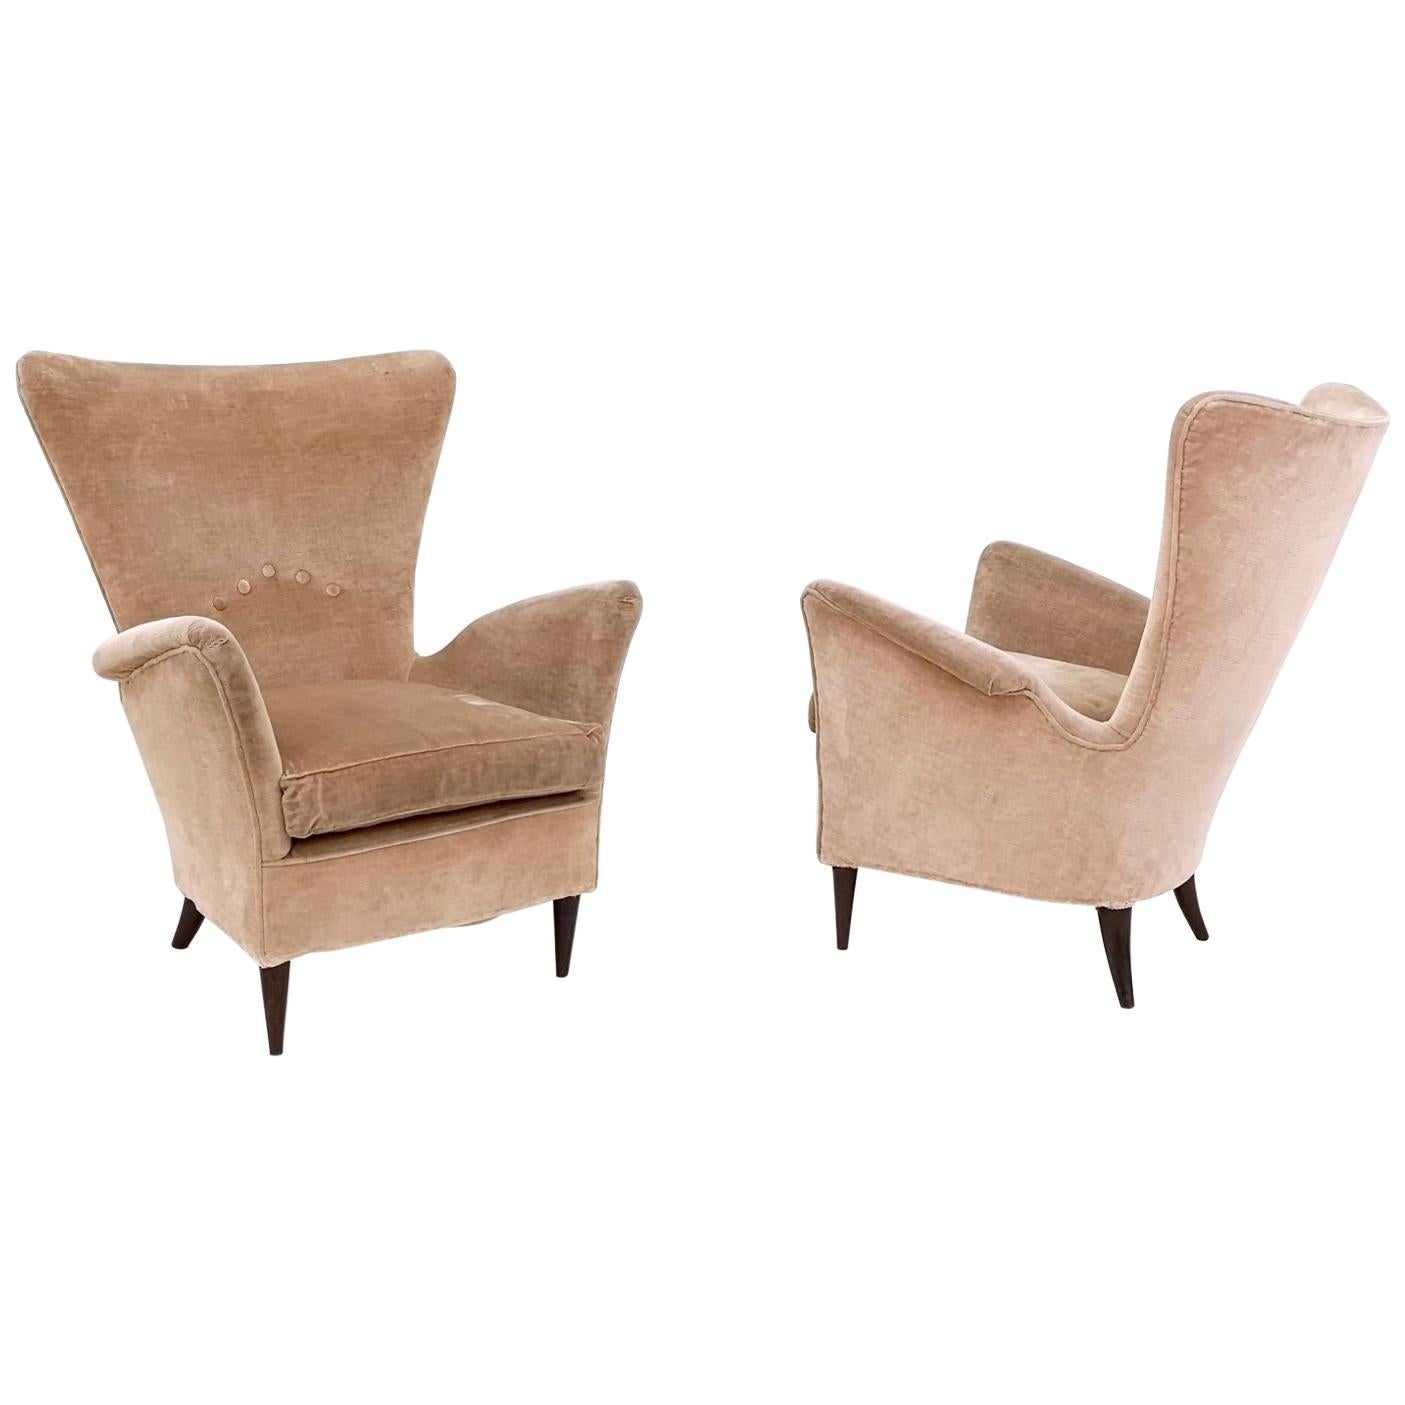 Pair of Beige Velvet Armchairs Ascribable to Gio Ponti for Hotel Bristol", 1950s